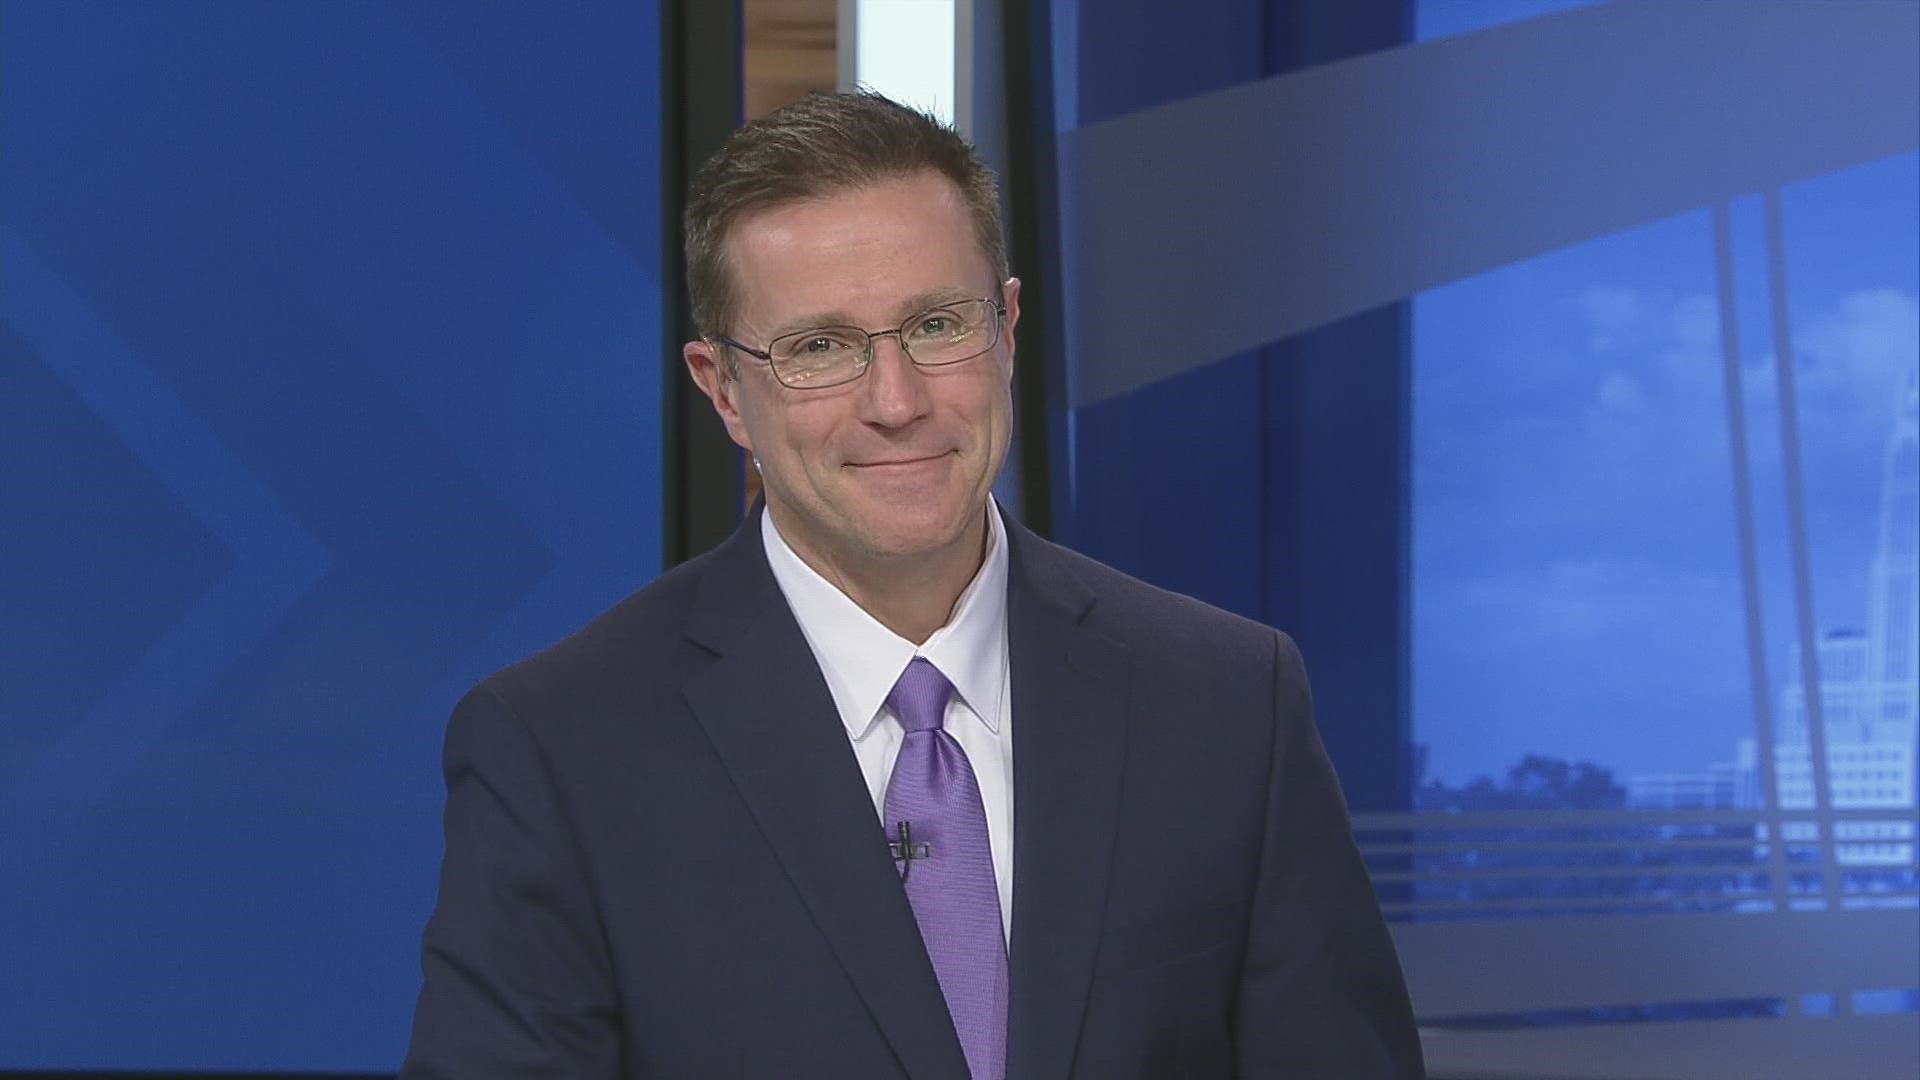 Jerry Martz made his debut Tuesday on 10TV News. Viewers can see him weekdays at 5 p.m., 6 p.m. and 11 p.m. and streaming on 10TV+.